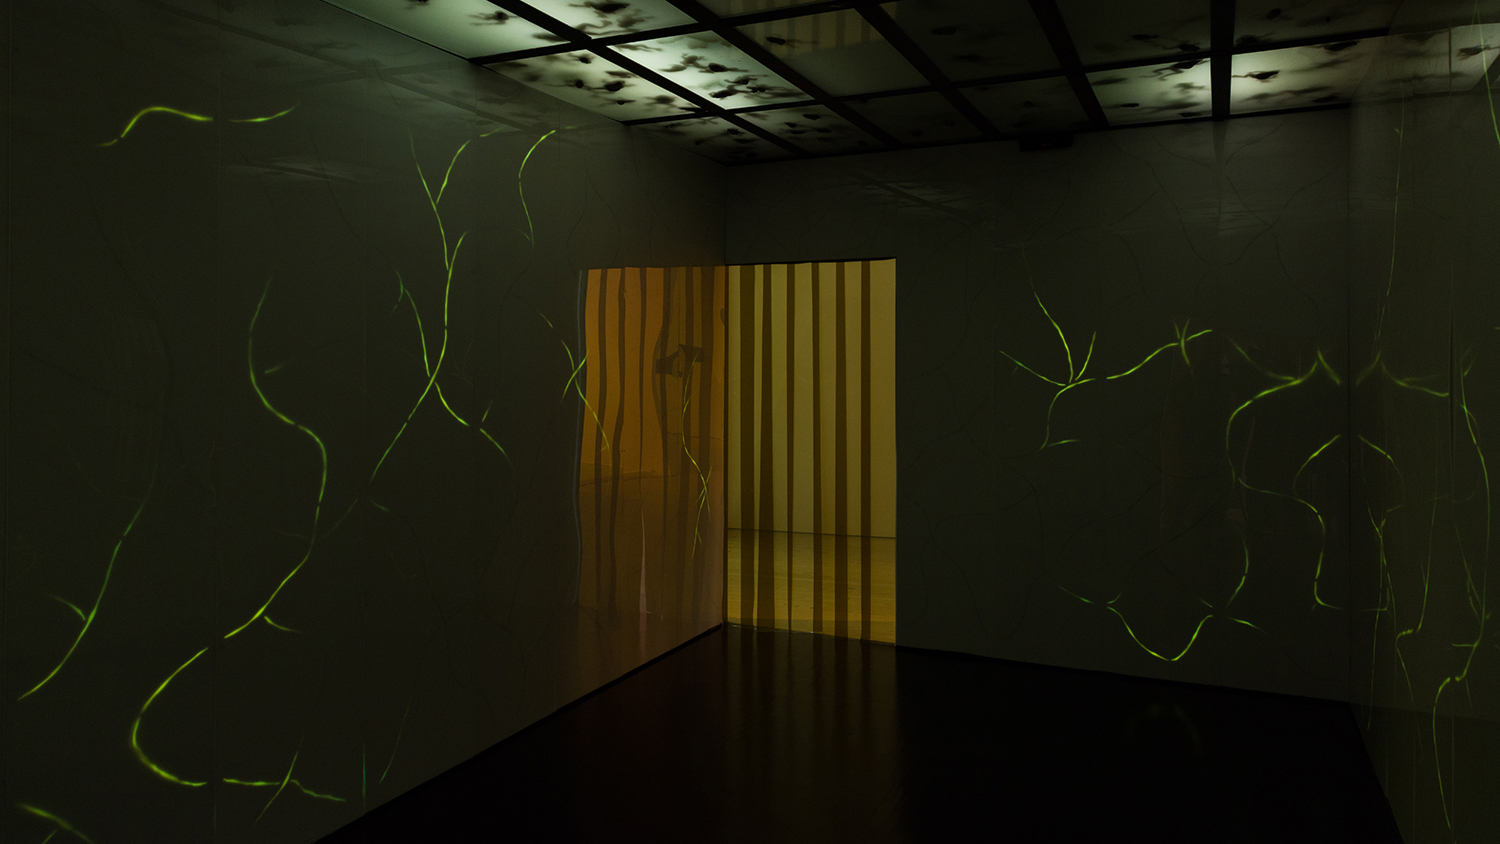 Installation view of “Dreamlands: Immersive Cinema and Art, 1905-2016” (Whitney Museum of American Art, New York, October 28, 2016-February 5, 2017). Dora Budor, Adaption of an Instrument. Courtesy of the artist © 2016

